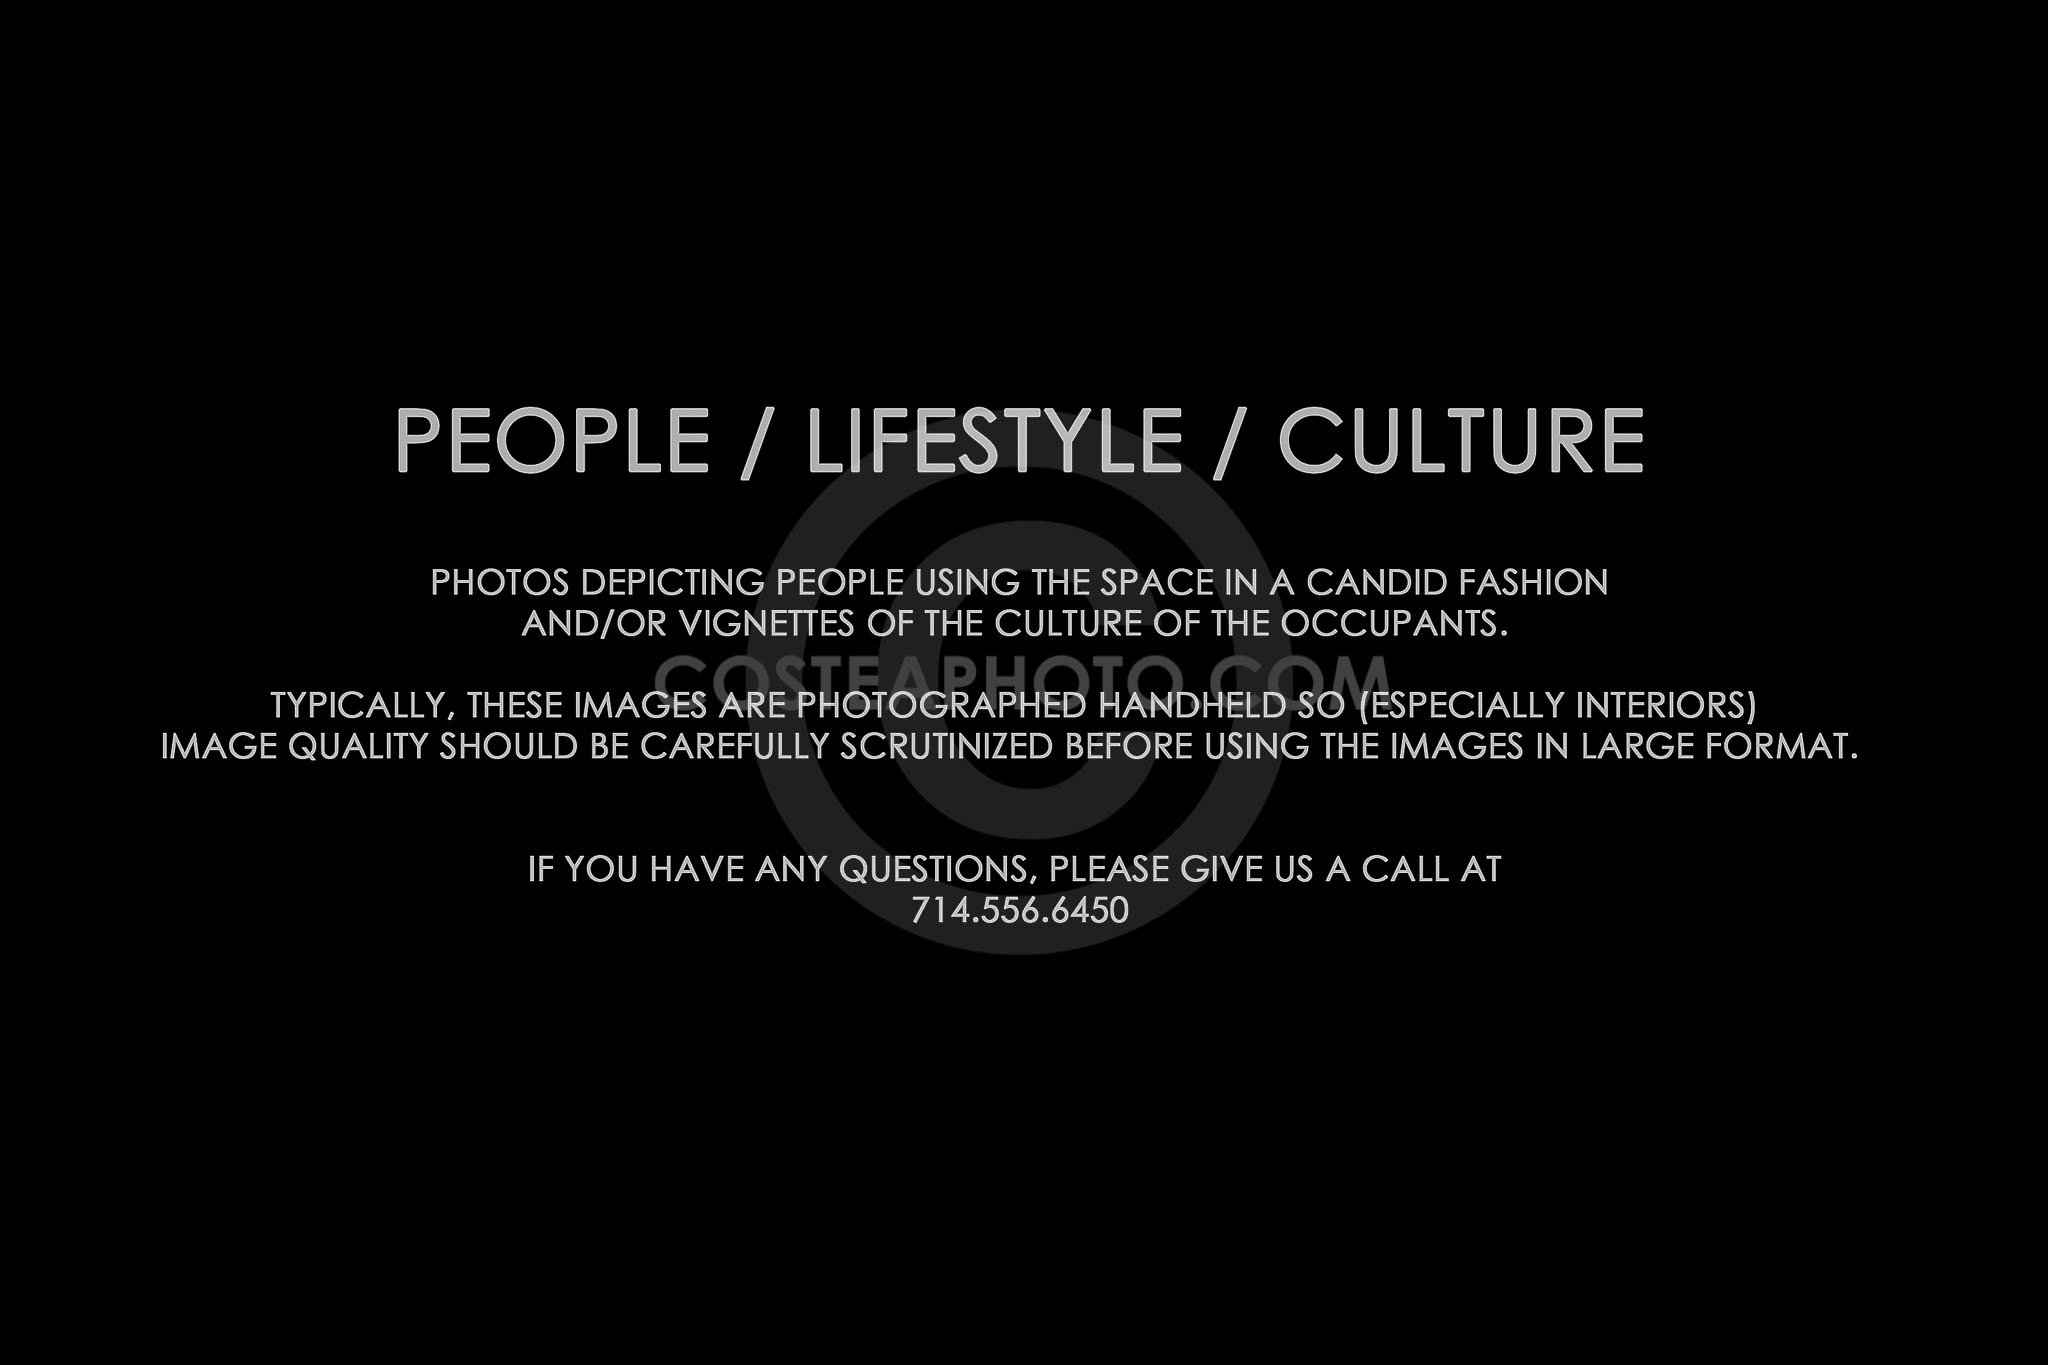 (243) TITLE PAGE - PEOPLE LIFESTYLE